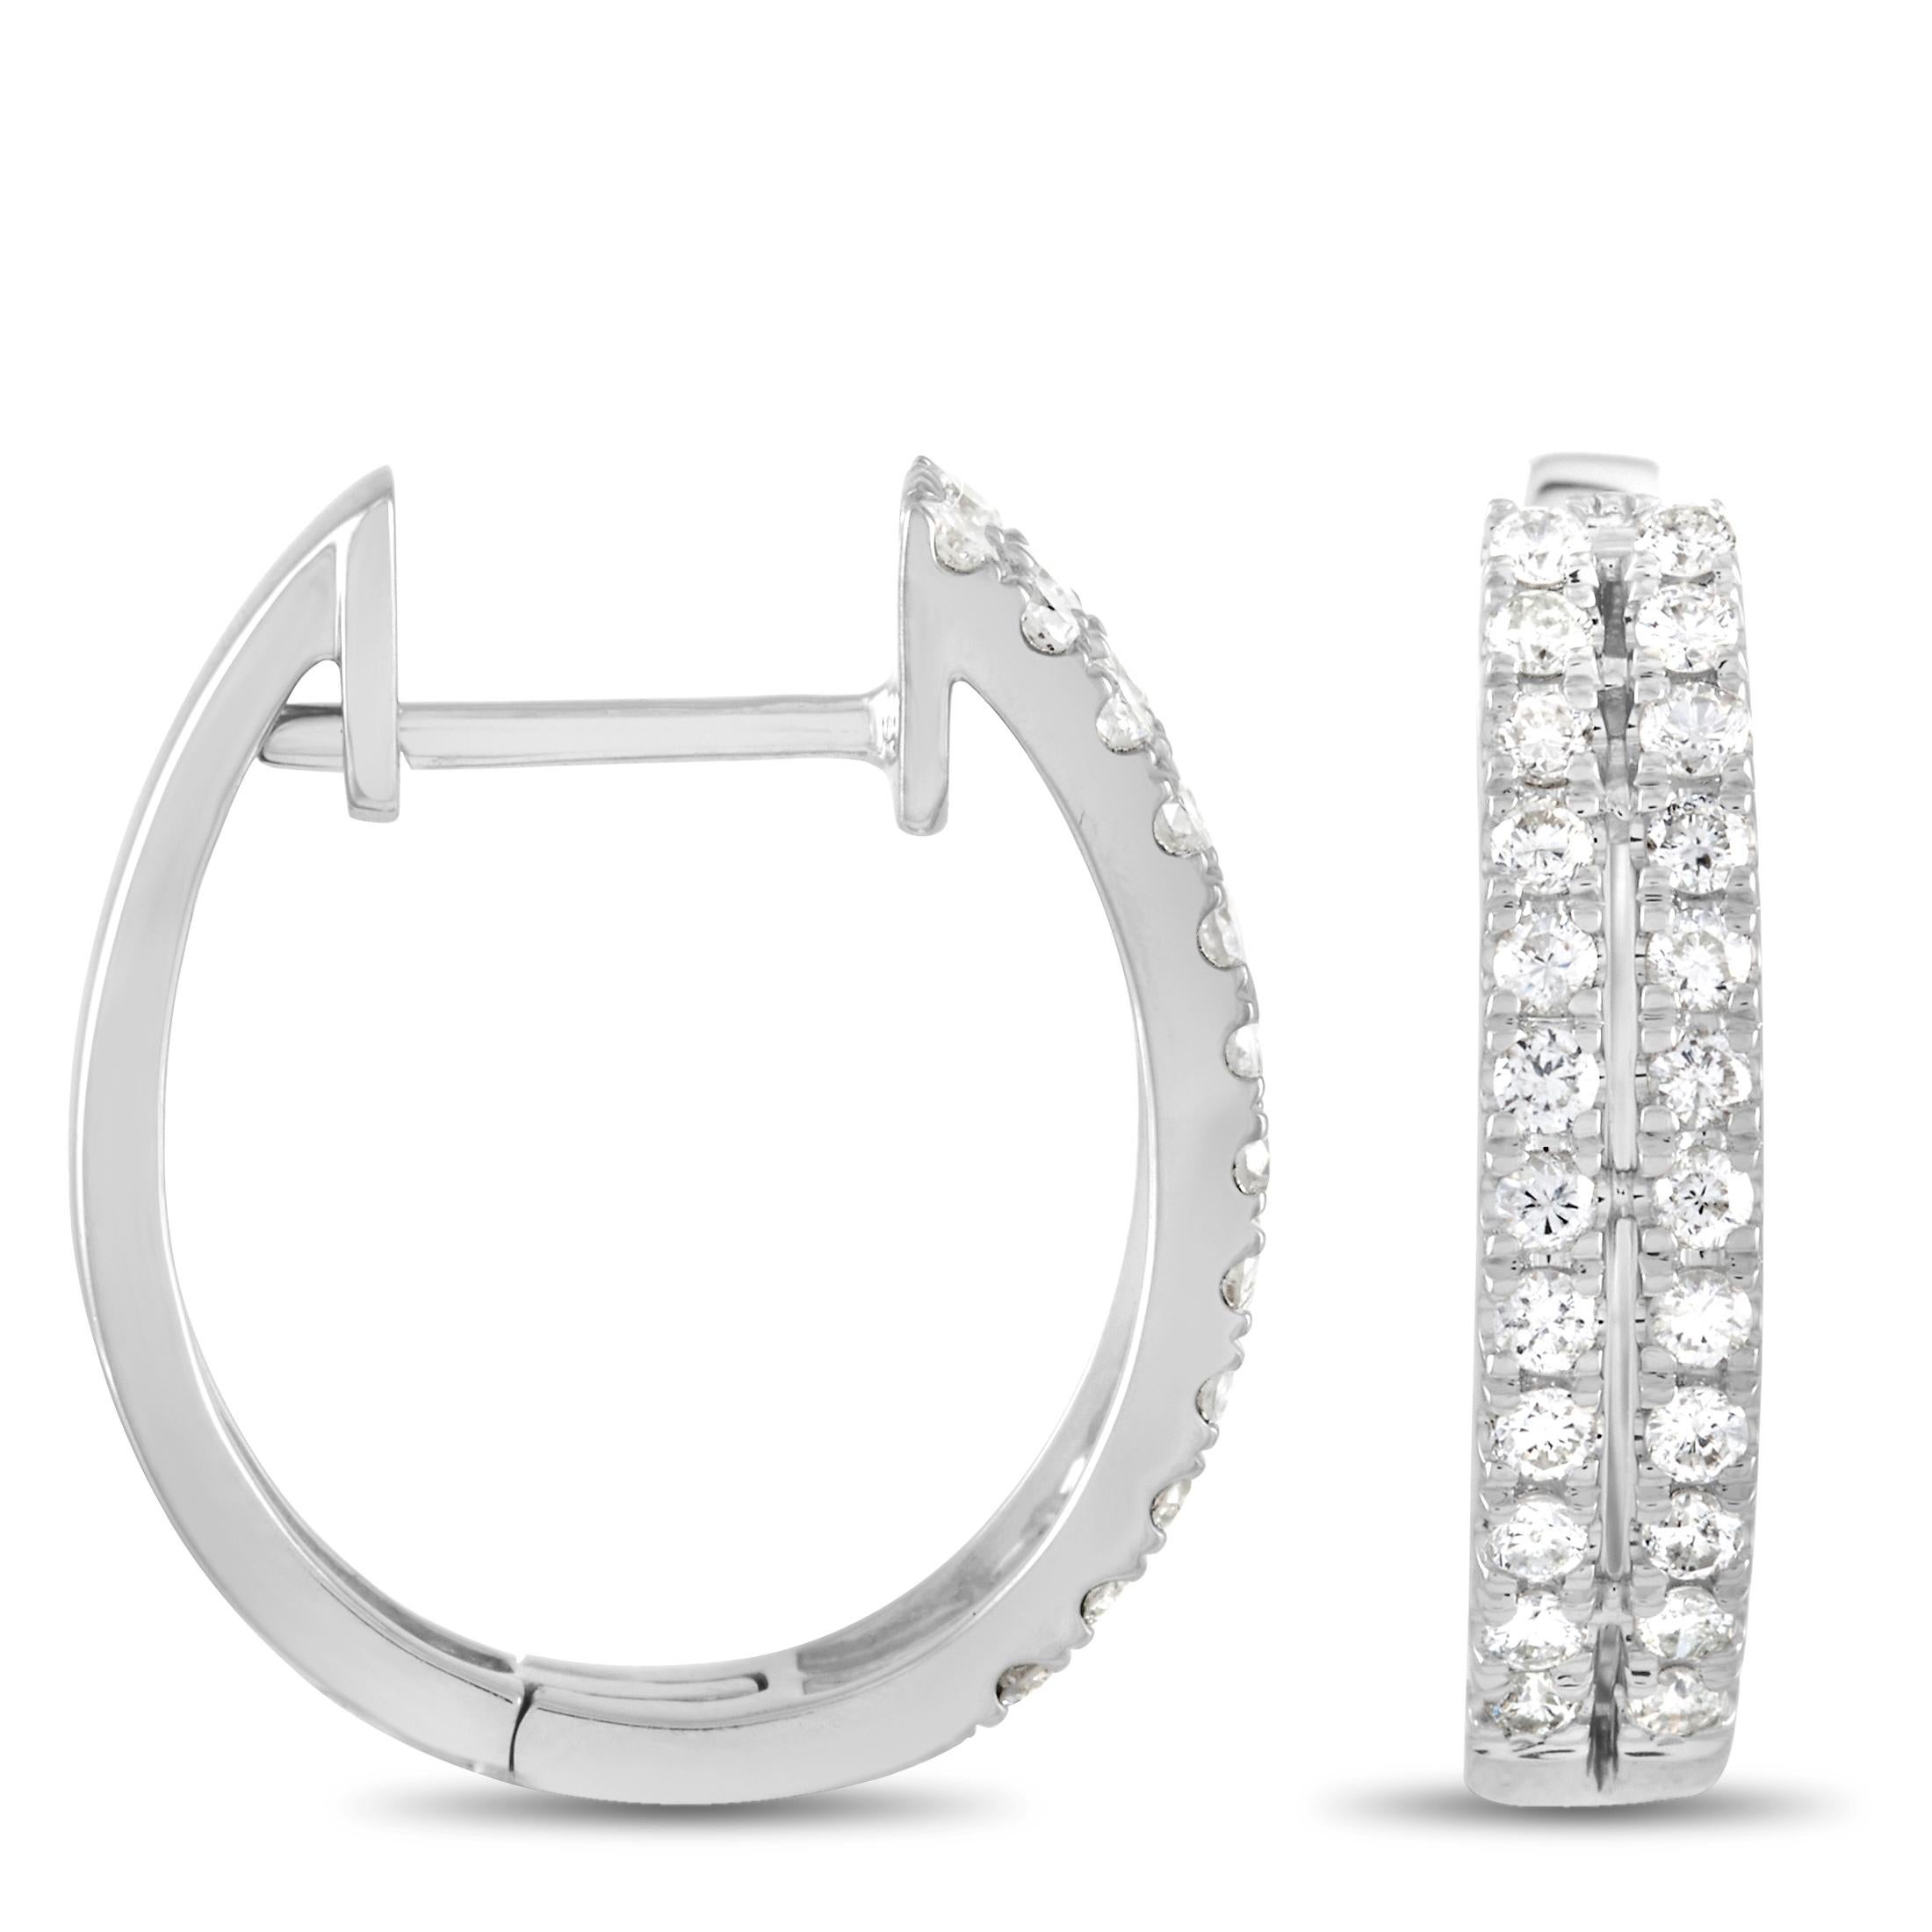 These LB Exclusive 14K White Gold 0.53 ct Diamond Hinged Hoop Earrings are made of 14K White Gold and set with 0.53 carats of round cut diamonds in two rows around the hoop. The earrings measure 0.56 inches in length and 0.57 inches in width with